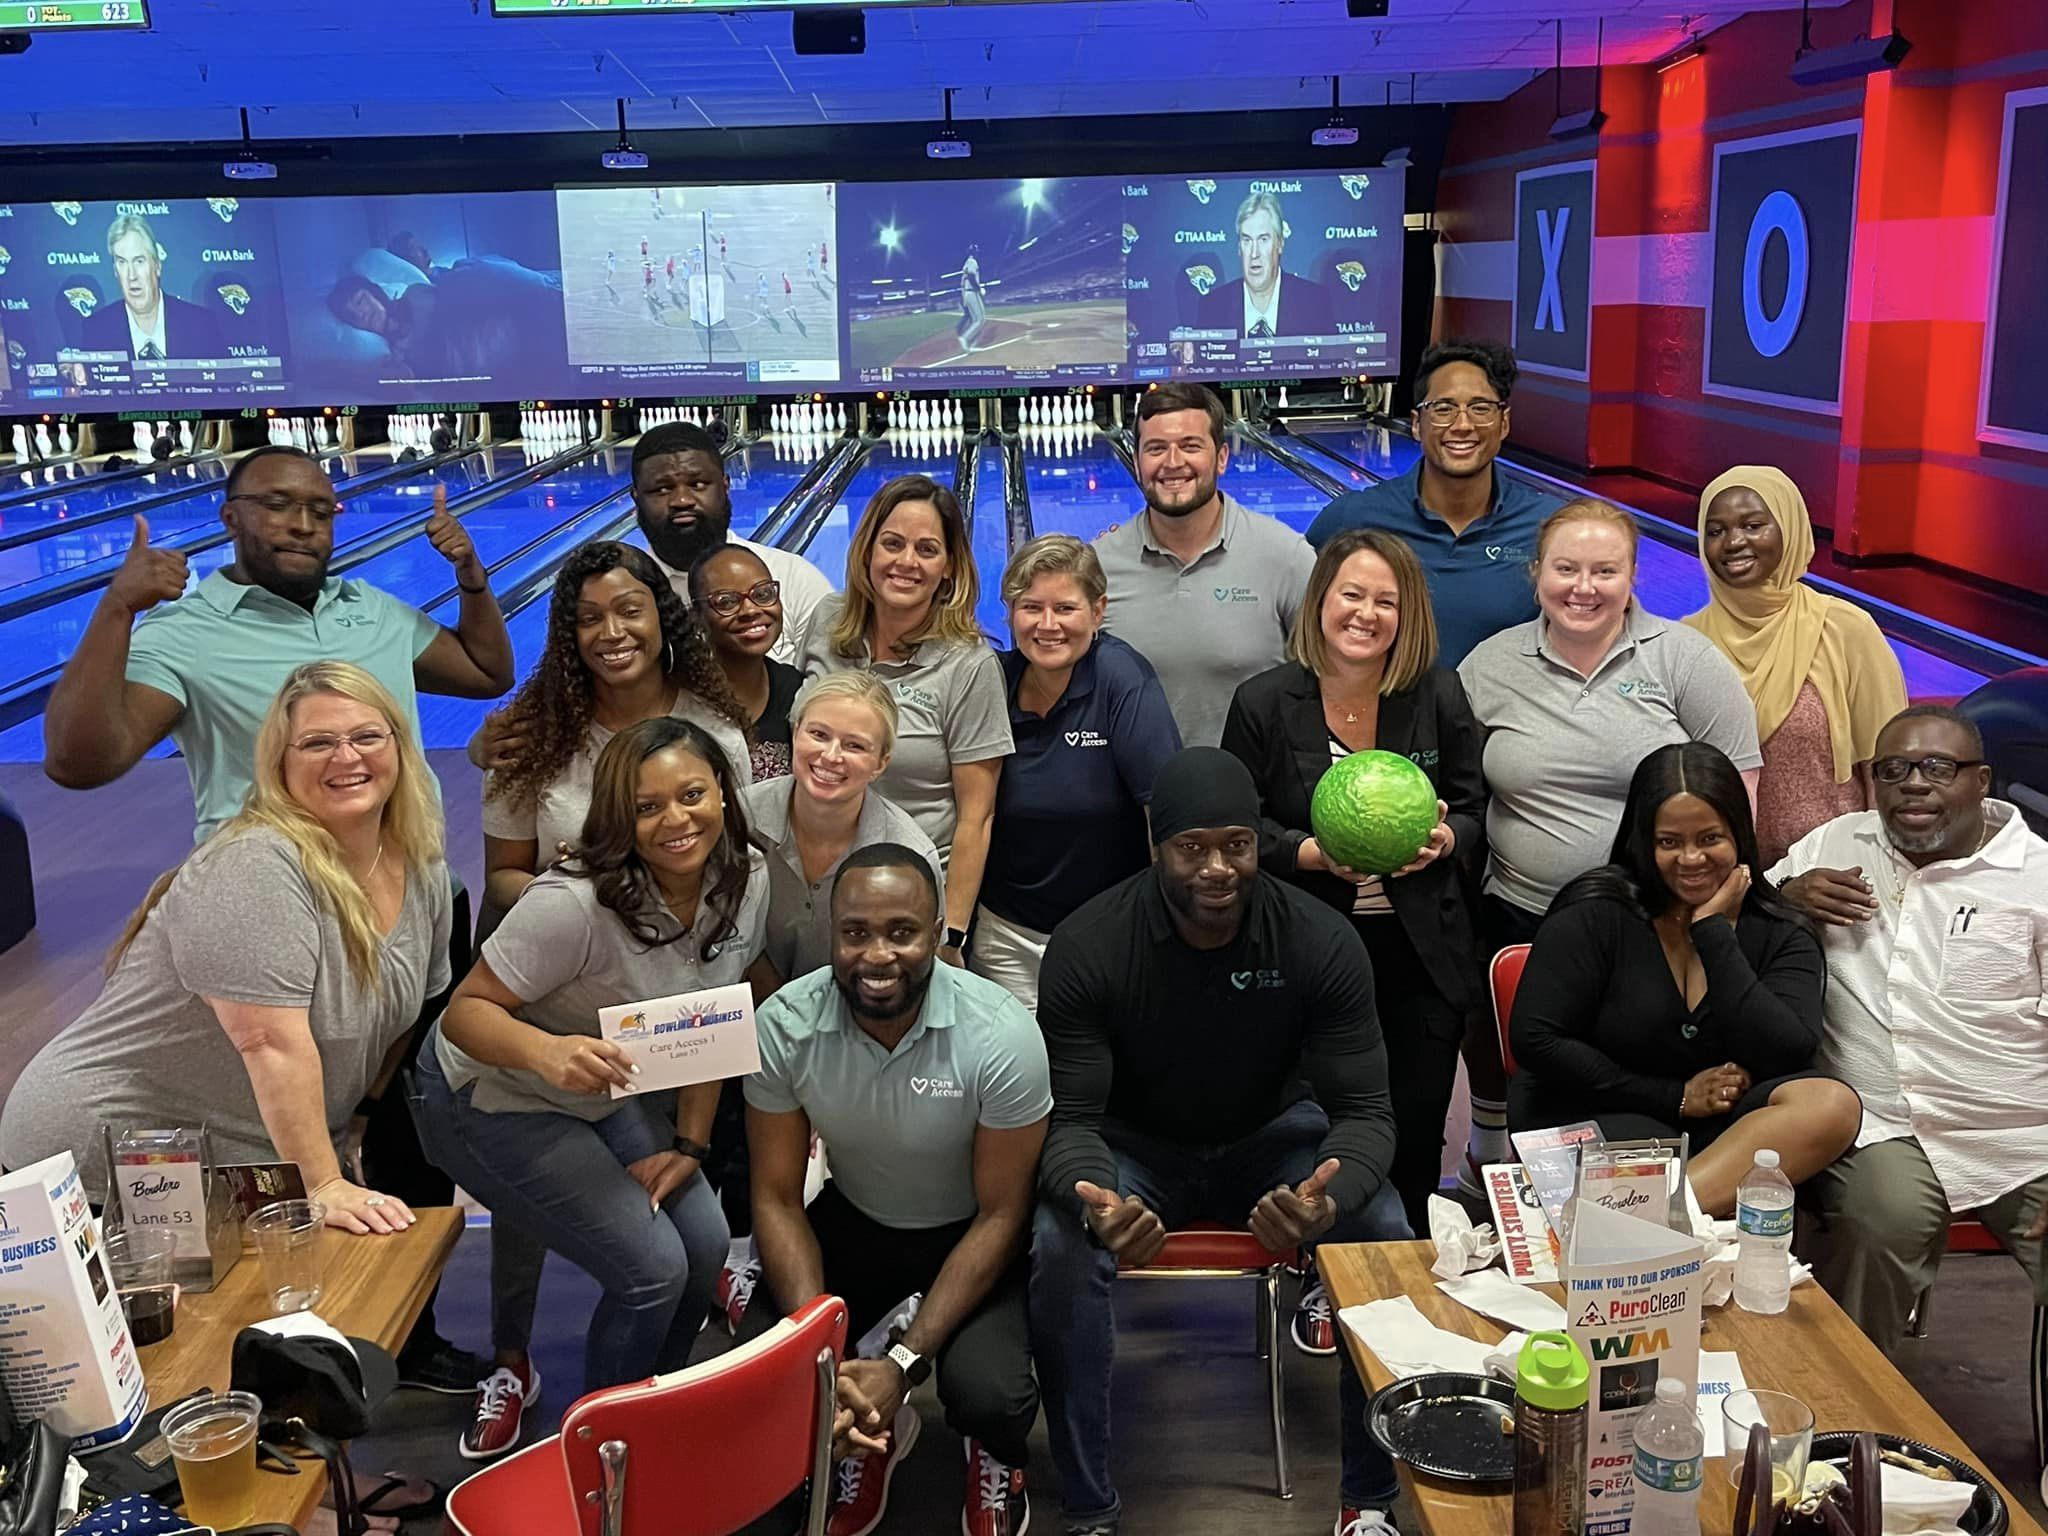 Strike for a Cause by Joining the 6th Annual Chamber Bowling Tournament in Tamarac 1